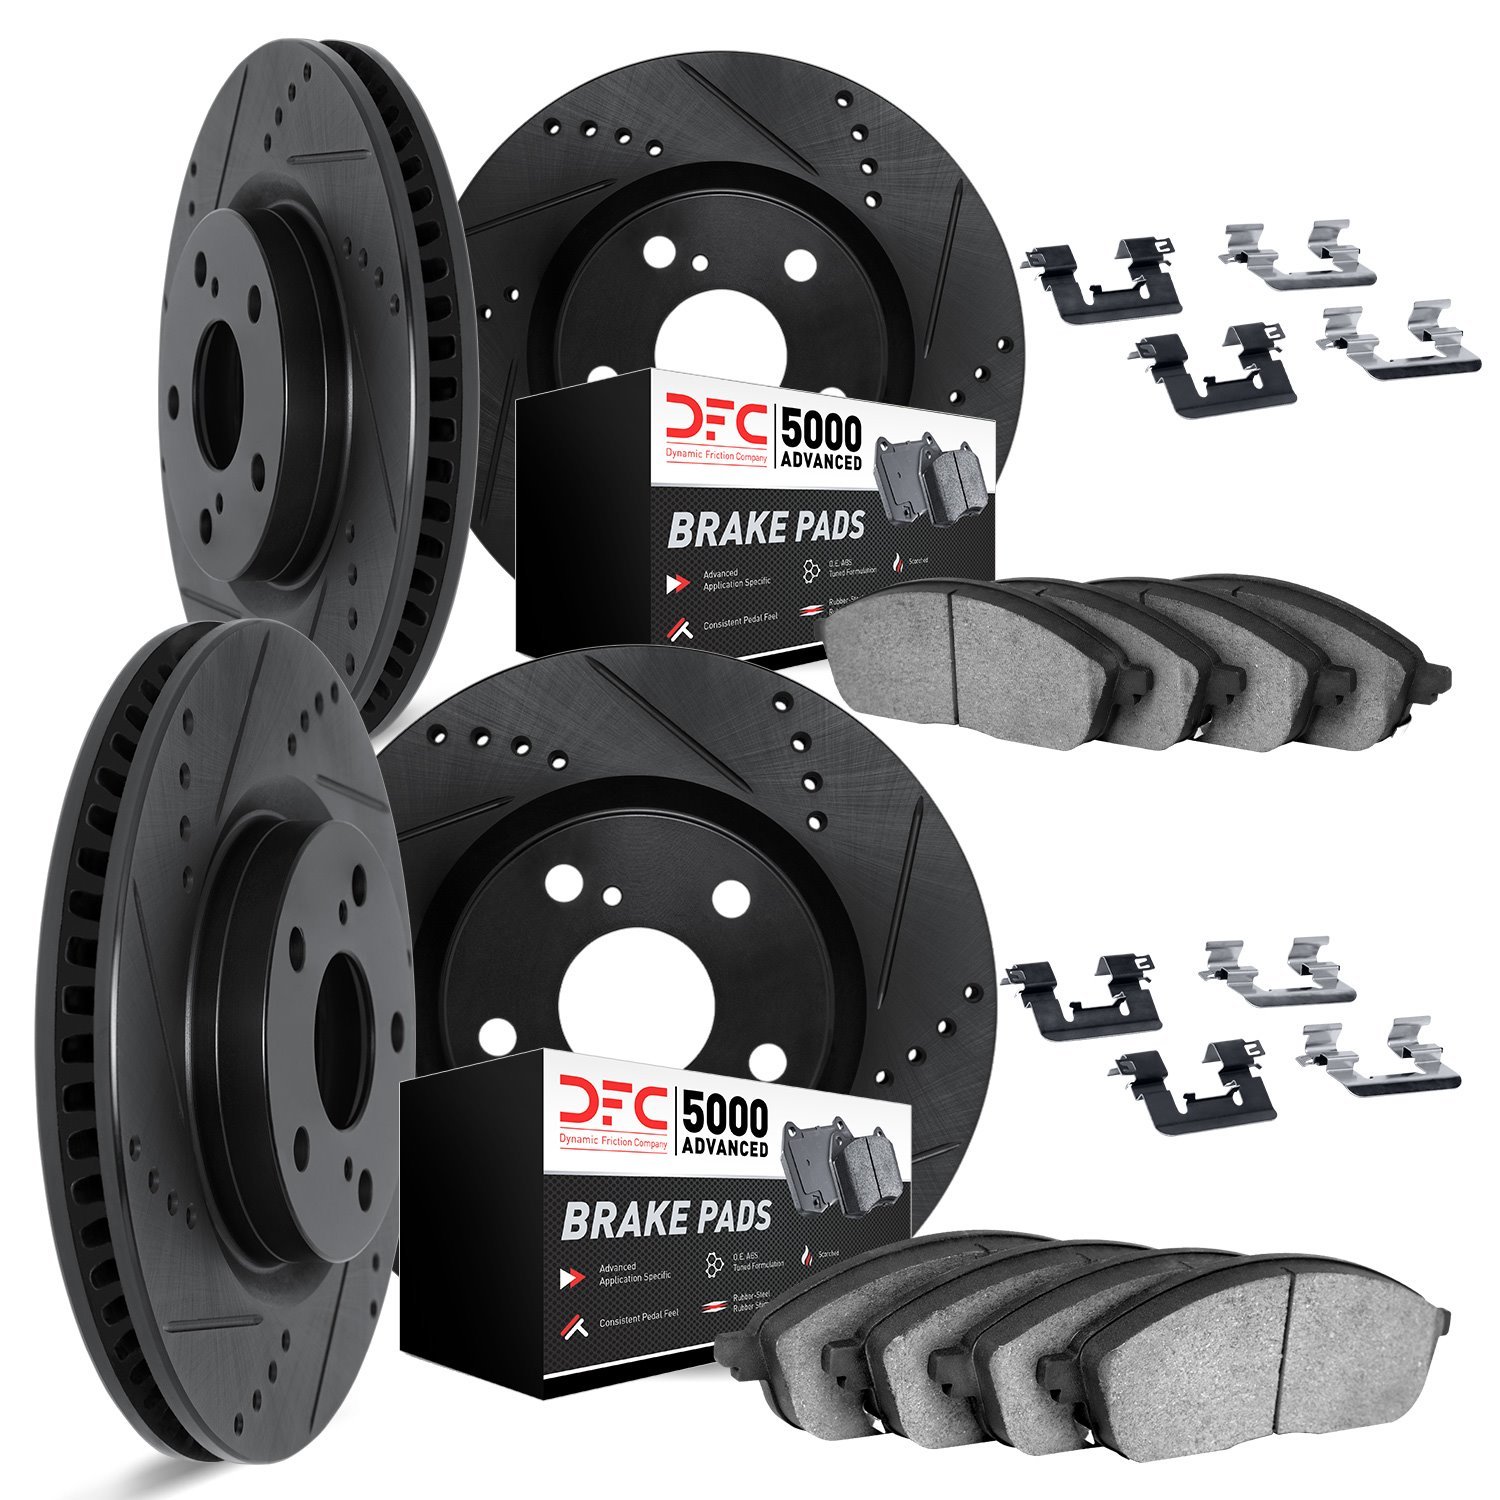 8514-31048 Drilled/Slotted Brake Rotors w/5000 Advanced Brake Pads Kit & Hardware [Black], 2016-2020 BMW, Position: Front and Re